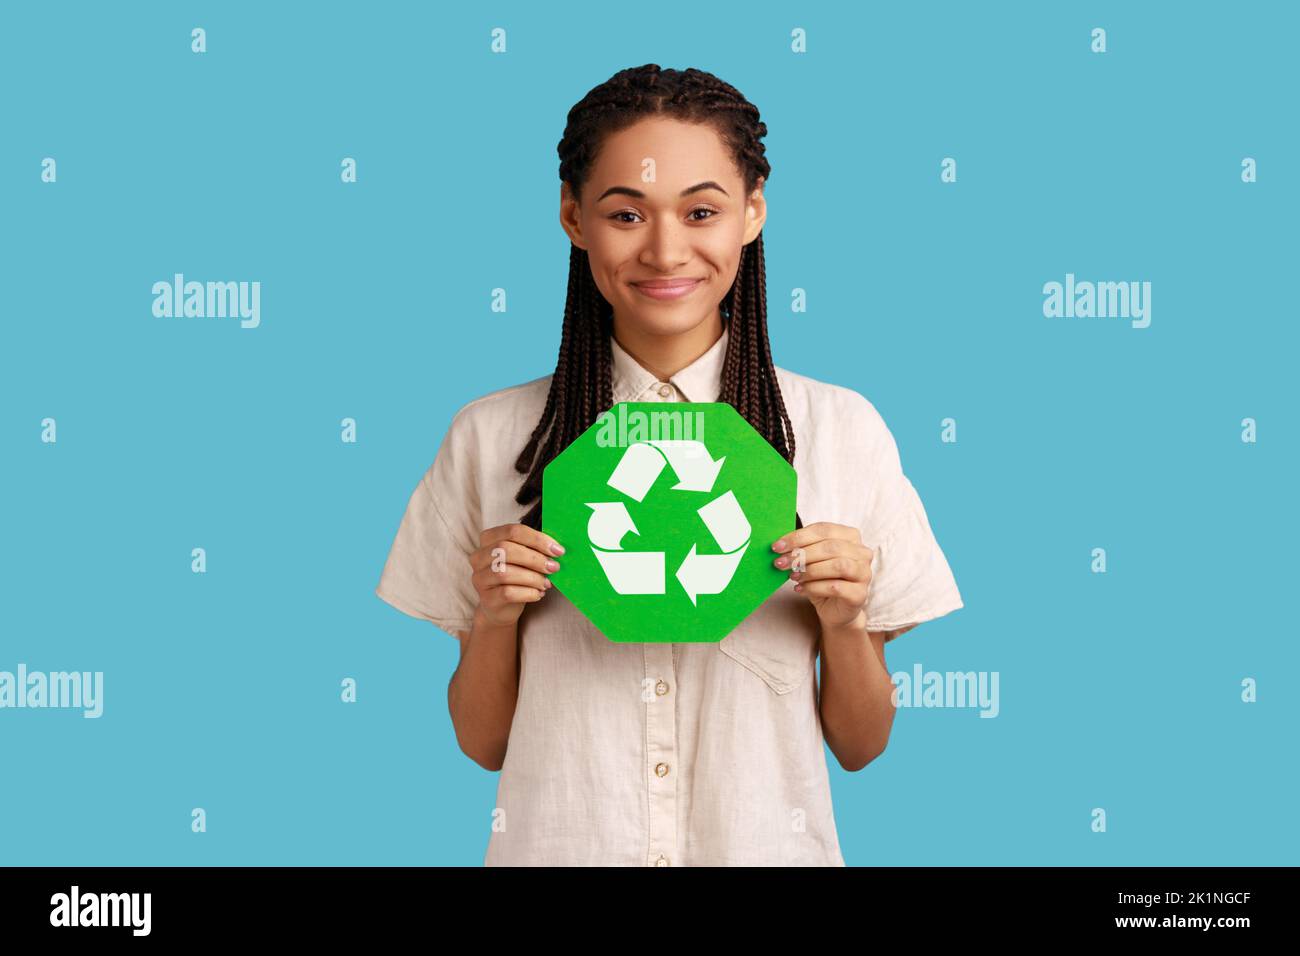 Responsible self confident woman with black dreadlocks holding green recycling sign in hand and seriously looking at camera, thinking green. Indoor studio shot isolated on blue background. Stock Photo